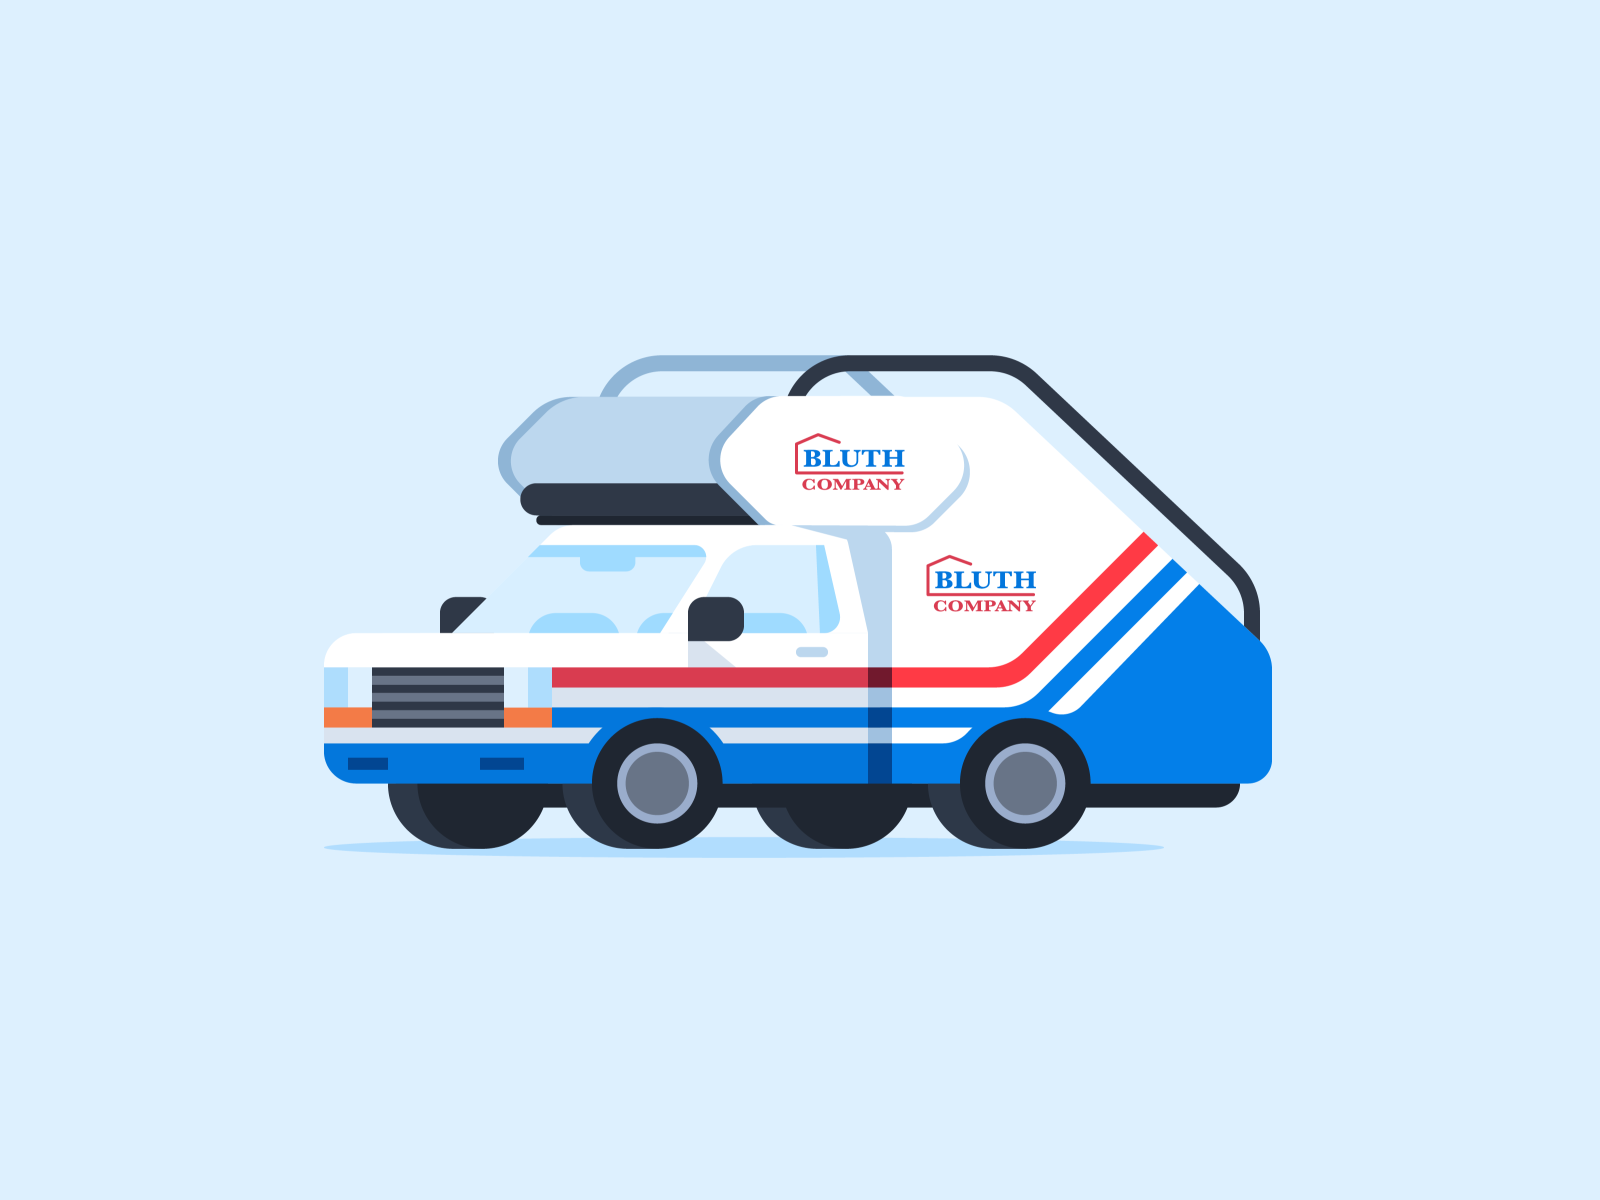 Bluth Stair Car - Arrested Development arreste development bluth car cars icon illustration simple stair car truck vector vehicle